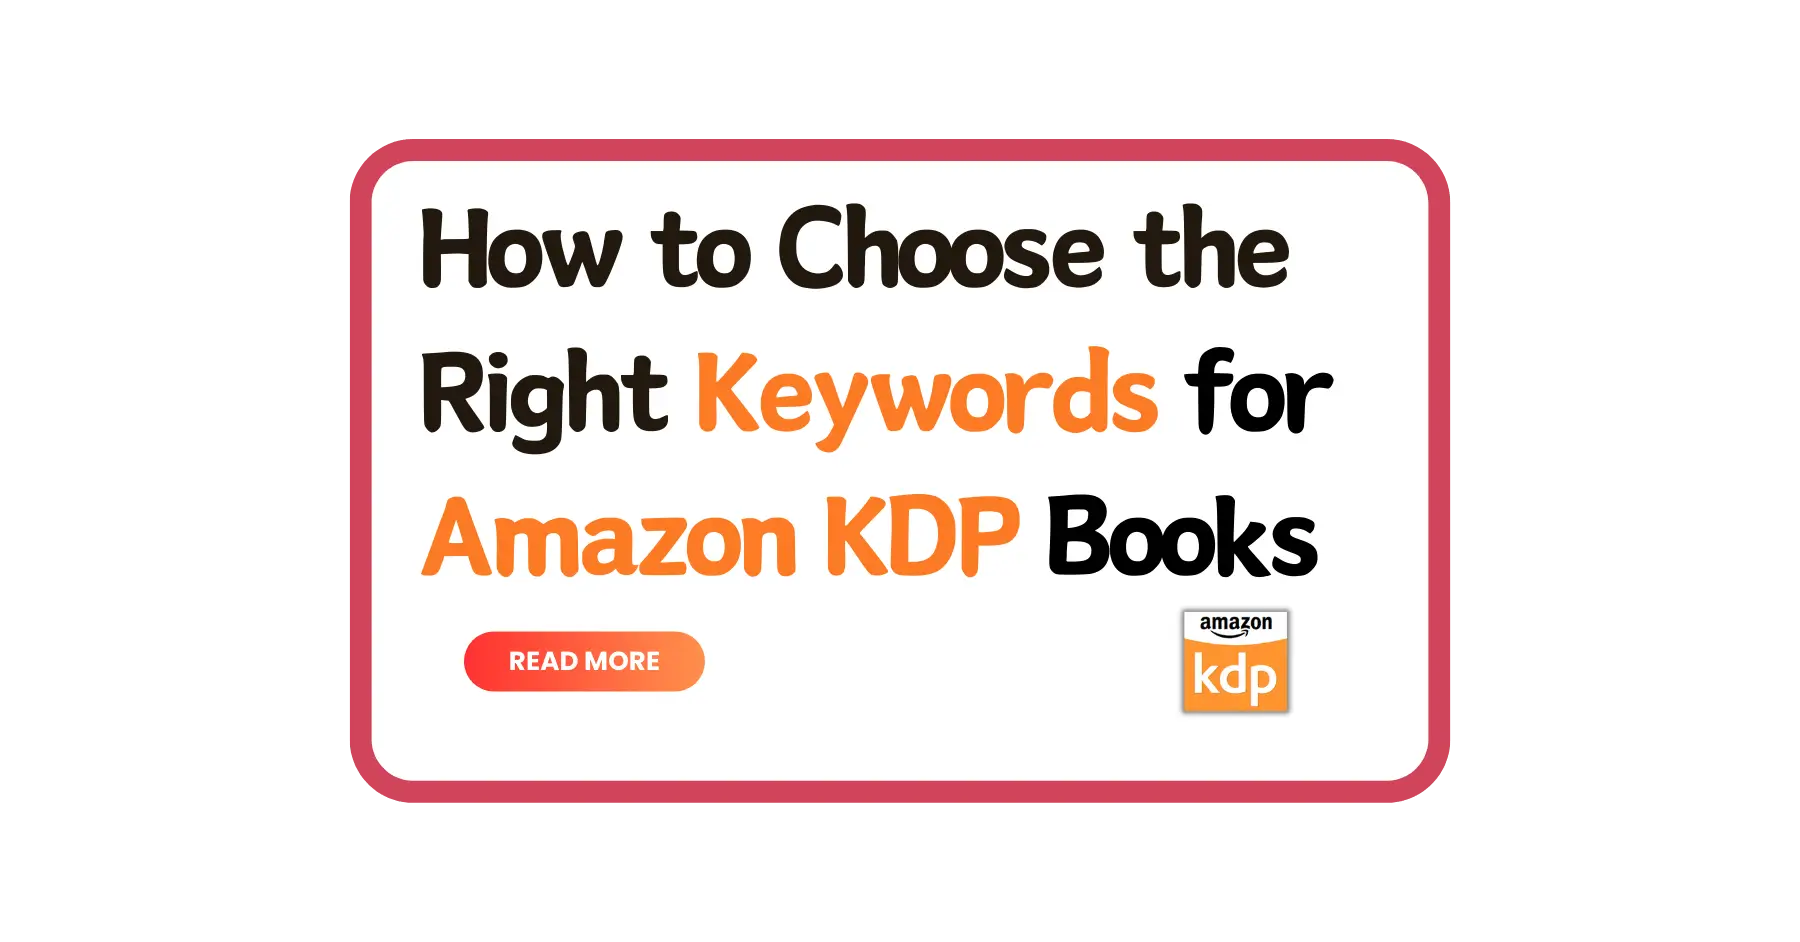 How to choose the right keywords for Amazon KDP books